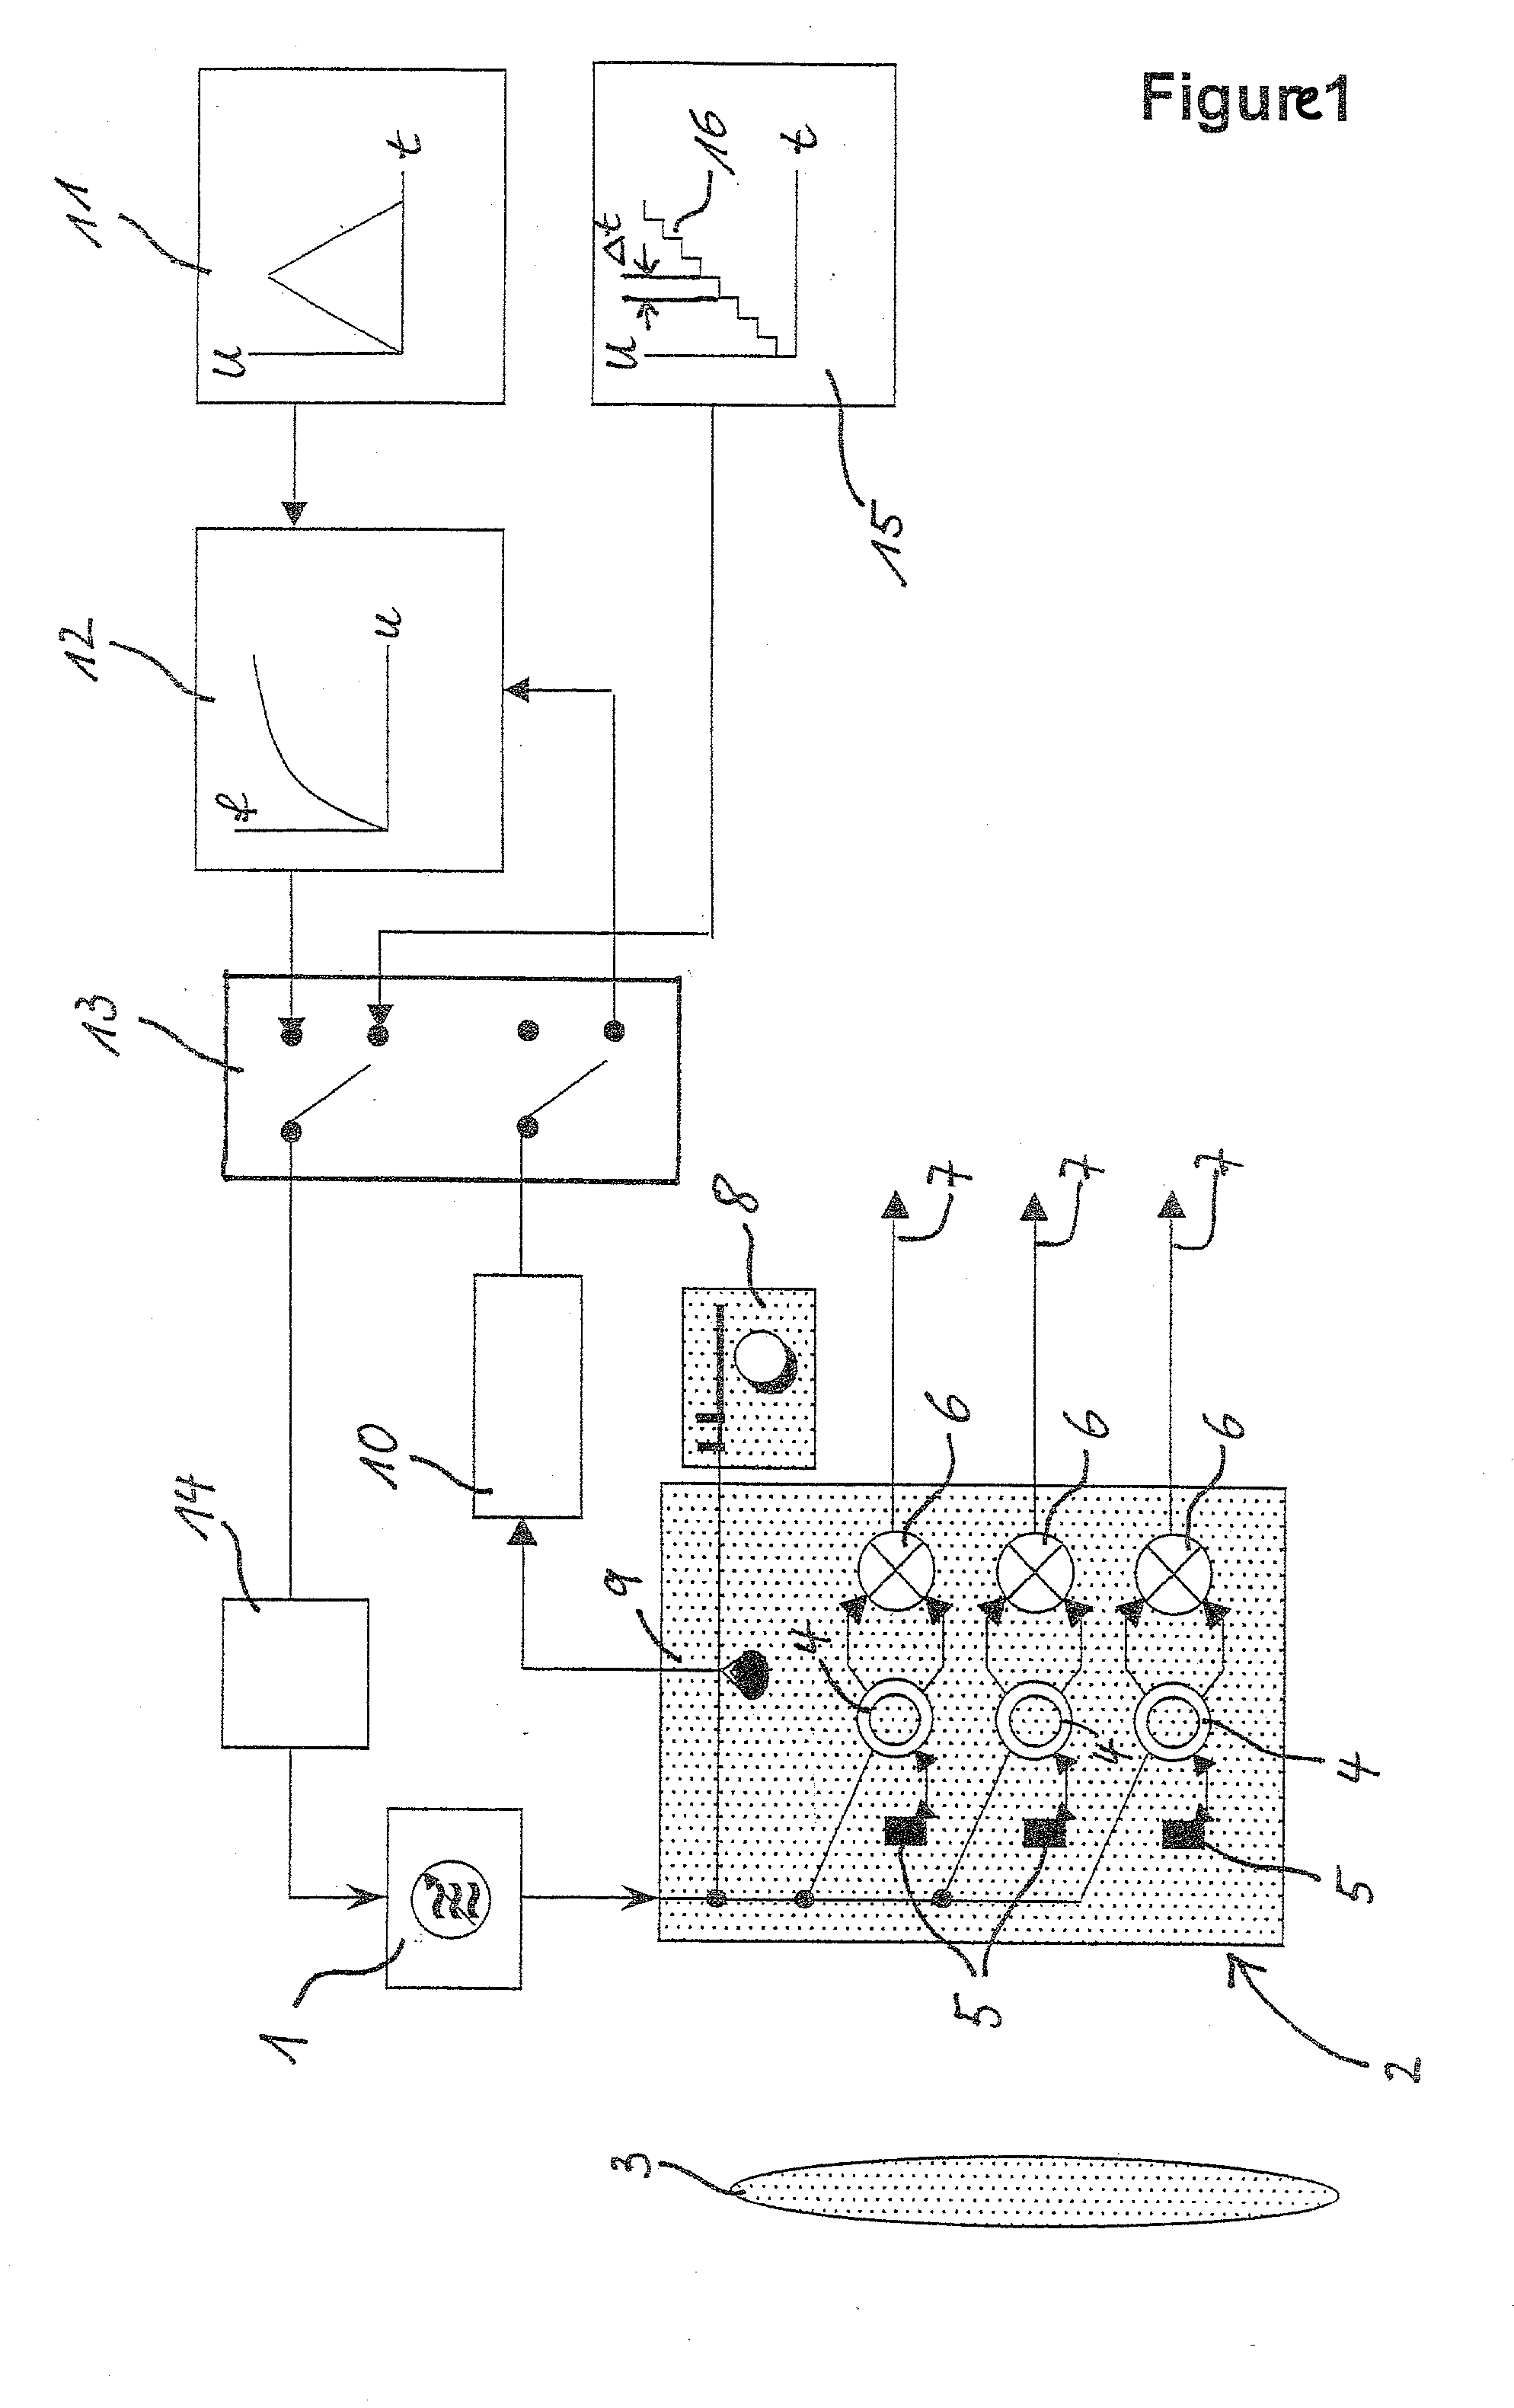 Method for detecting and correcting non-linearities in a microwave radar system